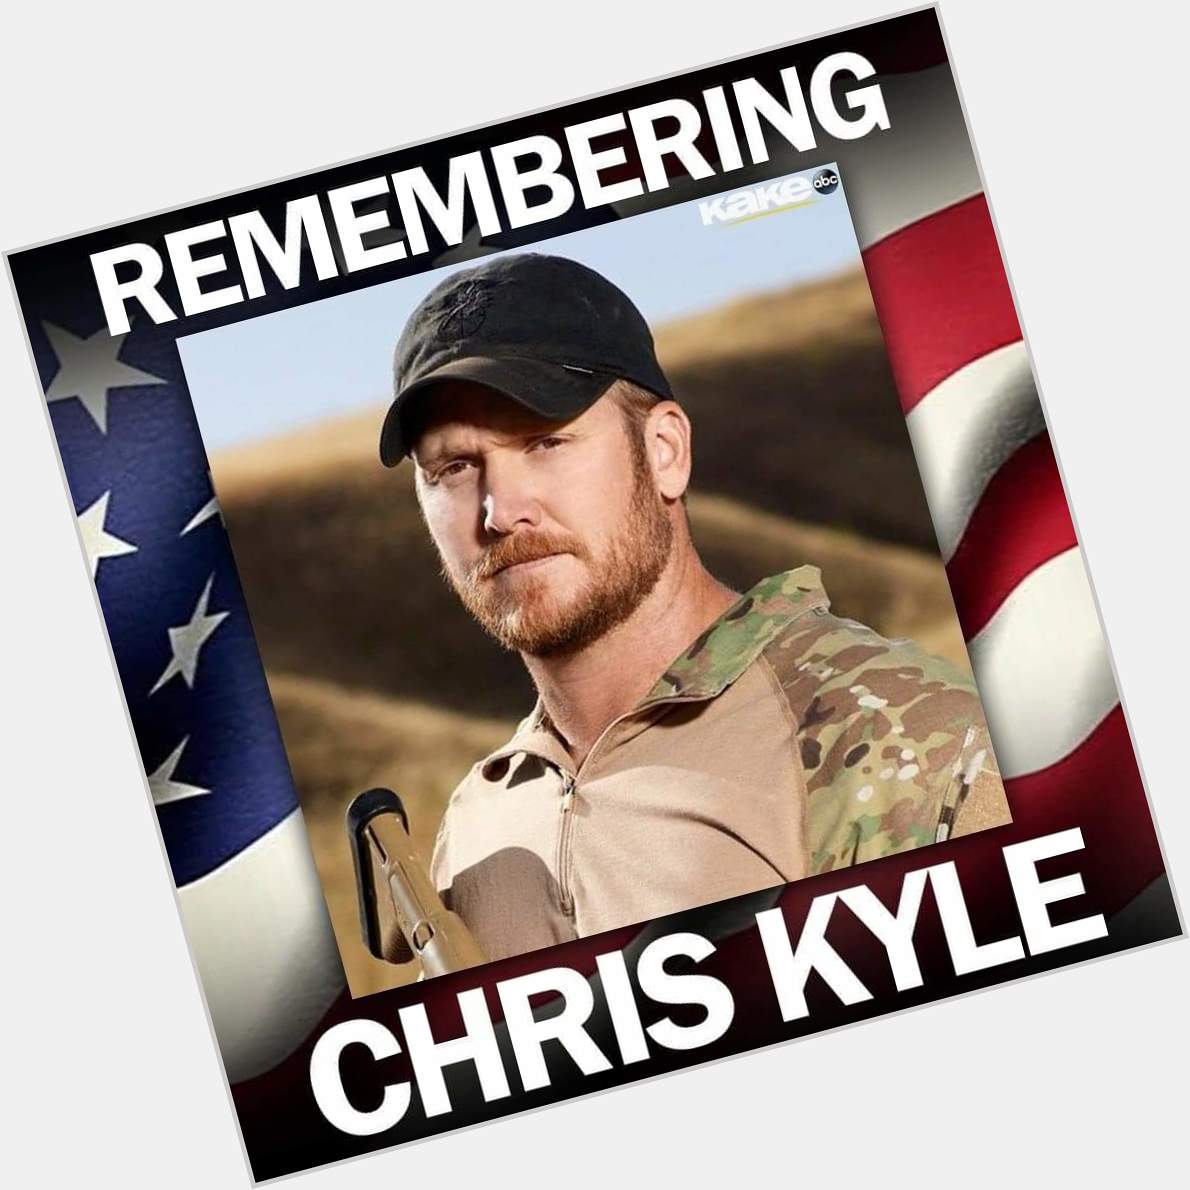 Happy birthday, Chris Kyle. The former U.S. Navy SEAL and American Sniper would have turned 49 years old today.  